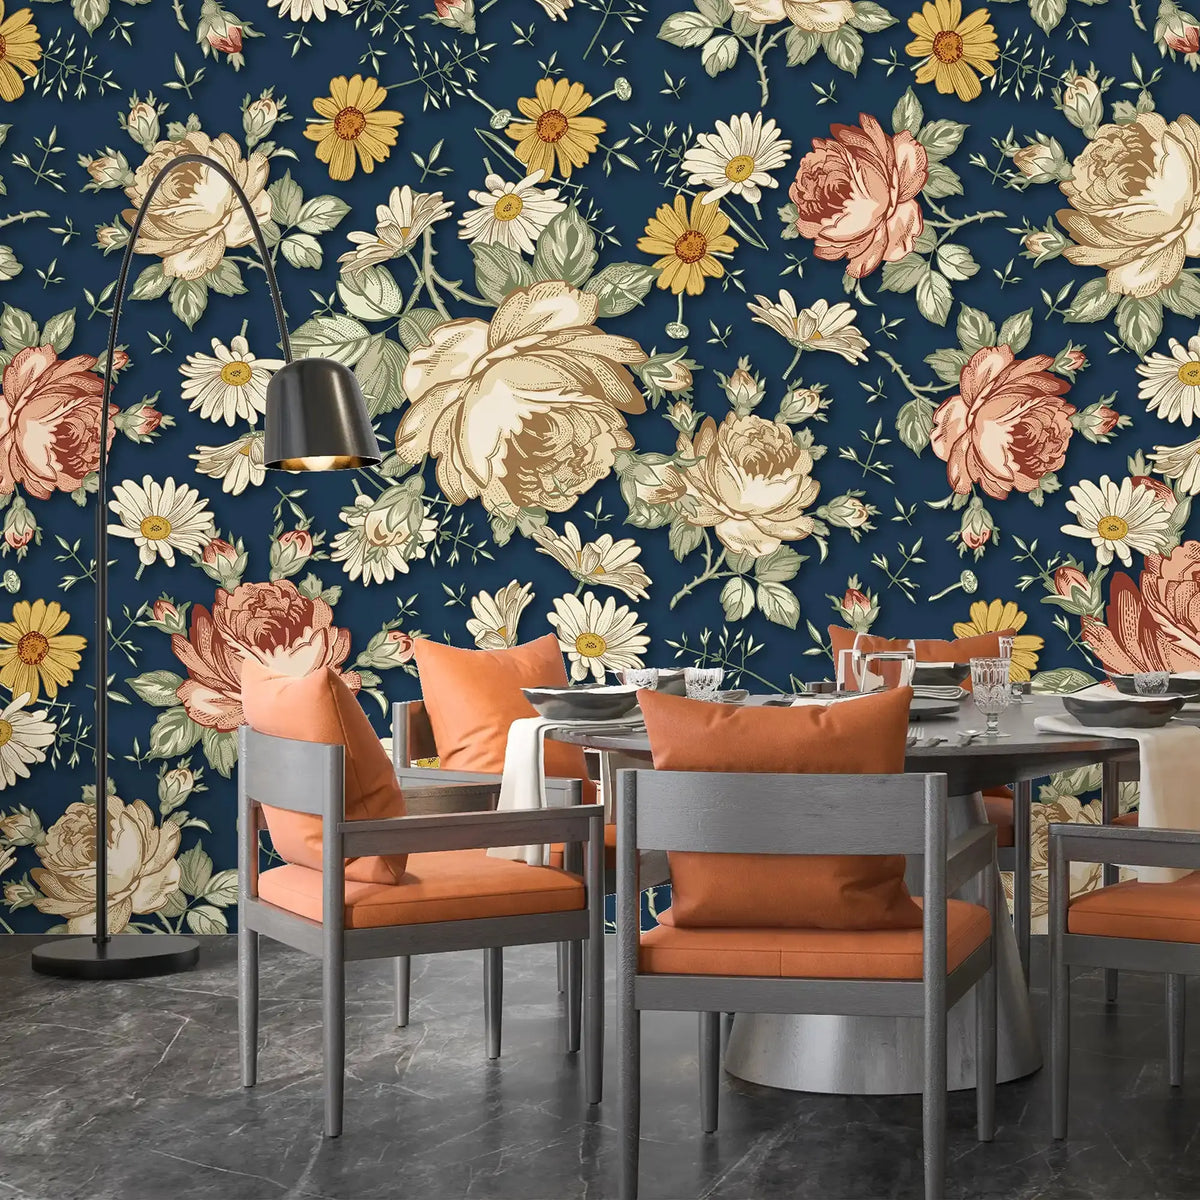 3097-A / Removable Wallpaper Peel and Stick, Floral & Geometric Pattern Wallpaper with Daisies for Room Decor - Artevella